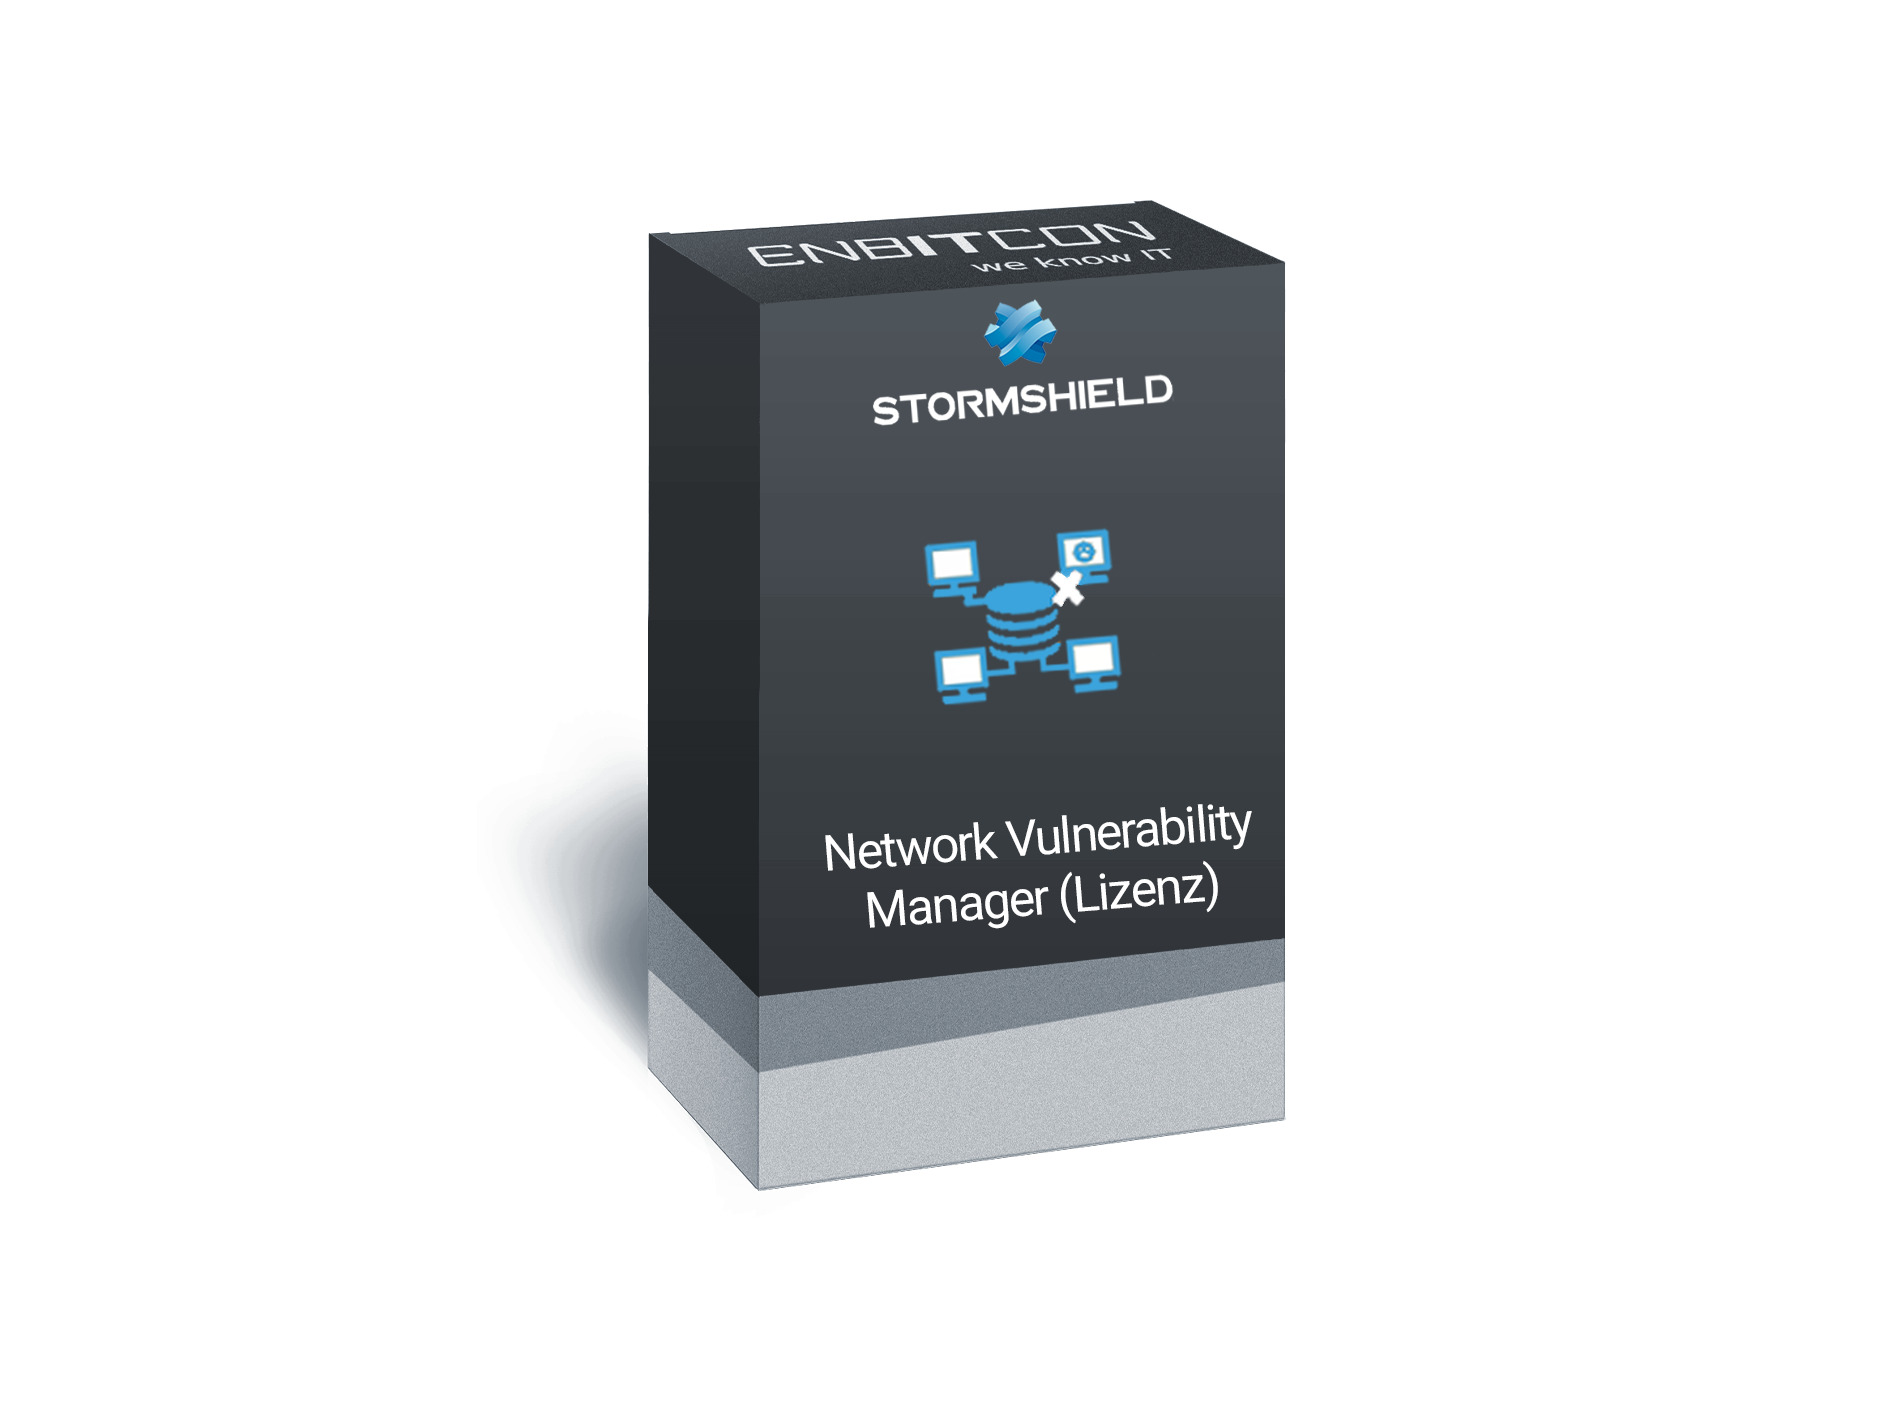 Stormshield SN710 Network Vulnerability Manager option